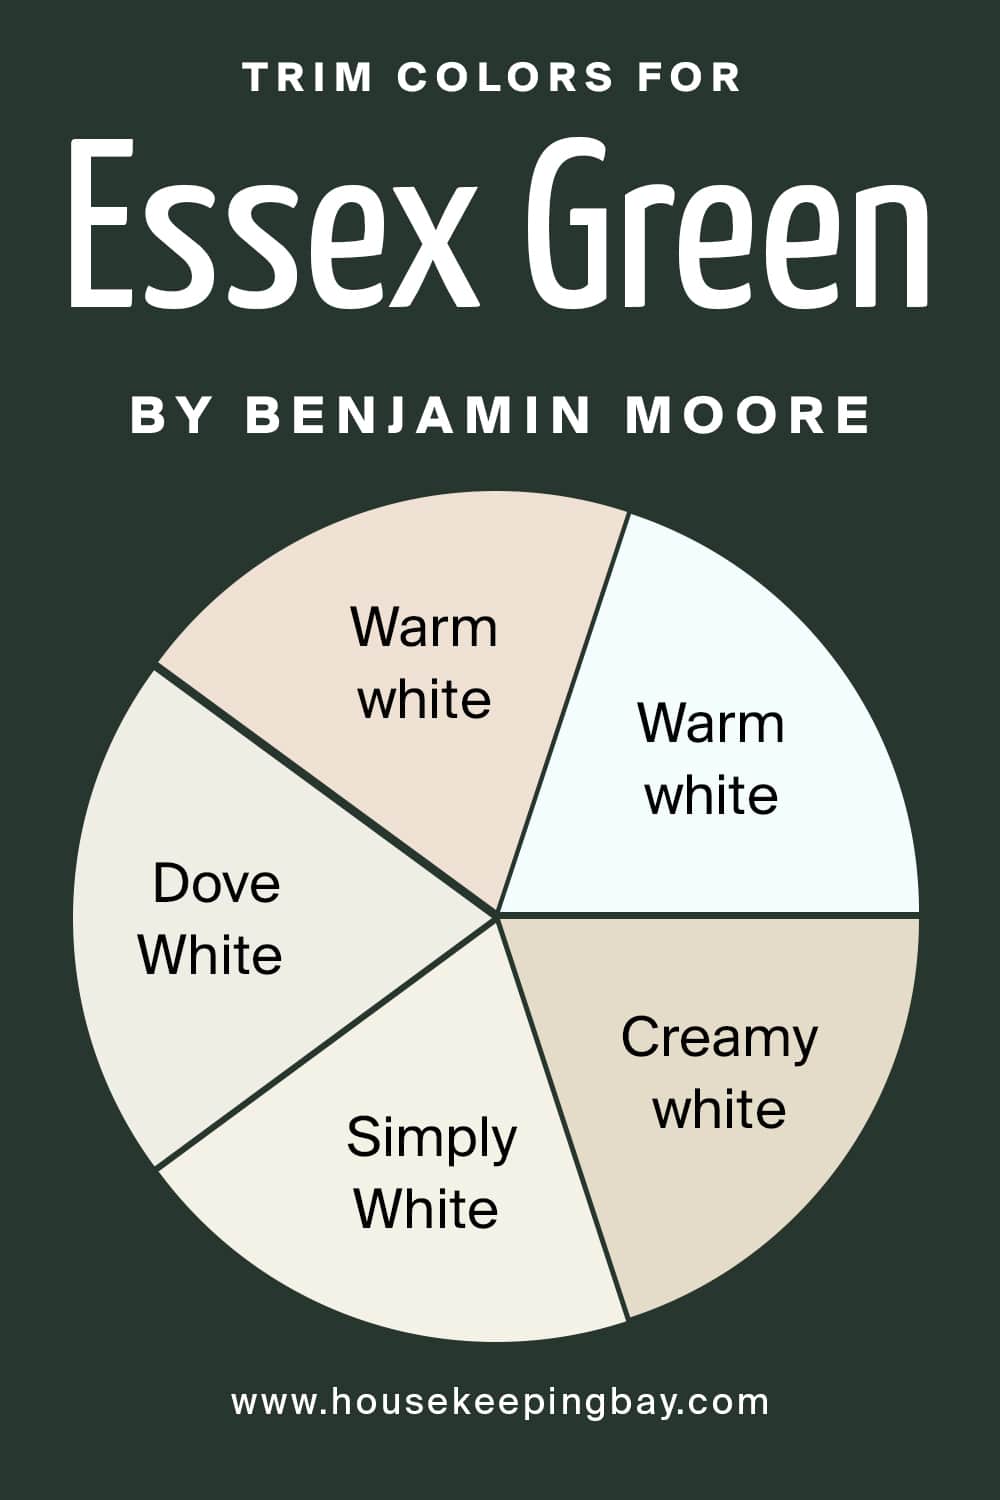 Trim Colors for Essex Green by Benjamin Moore